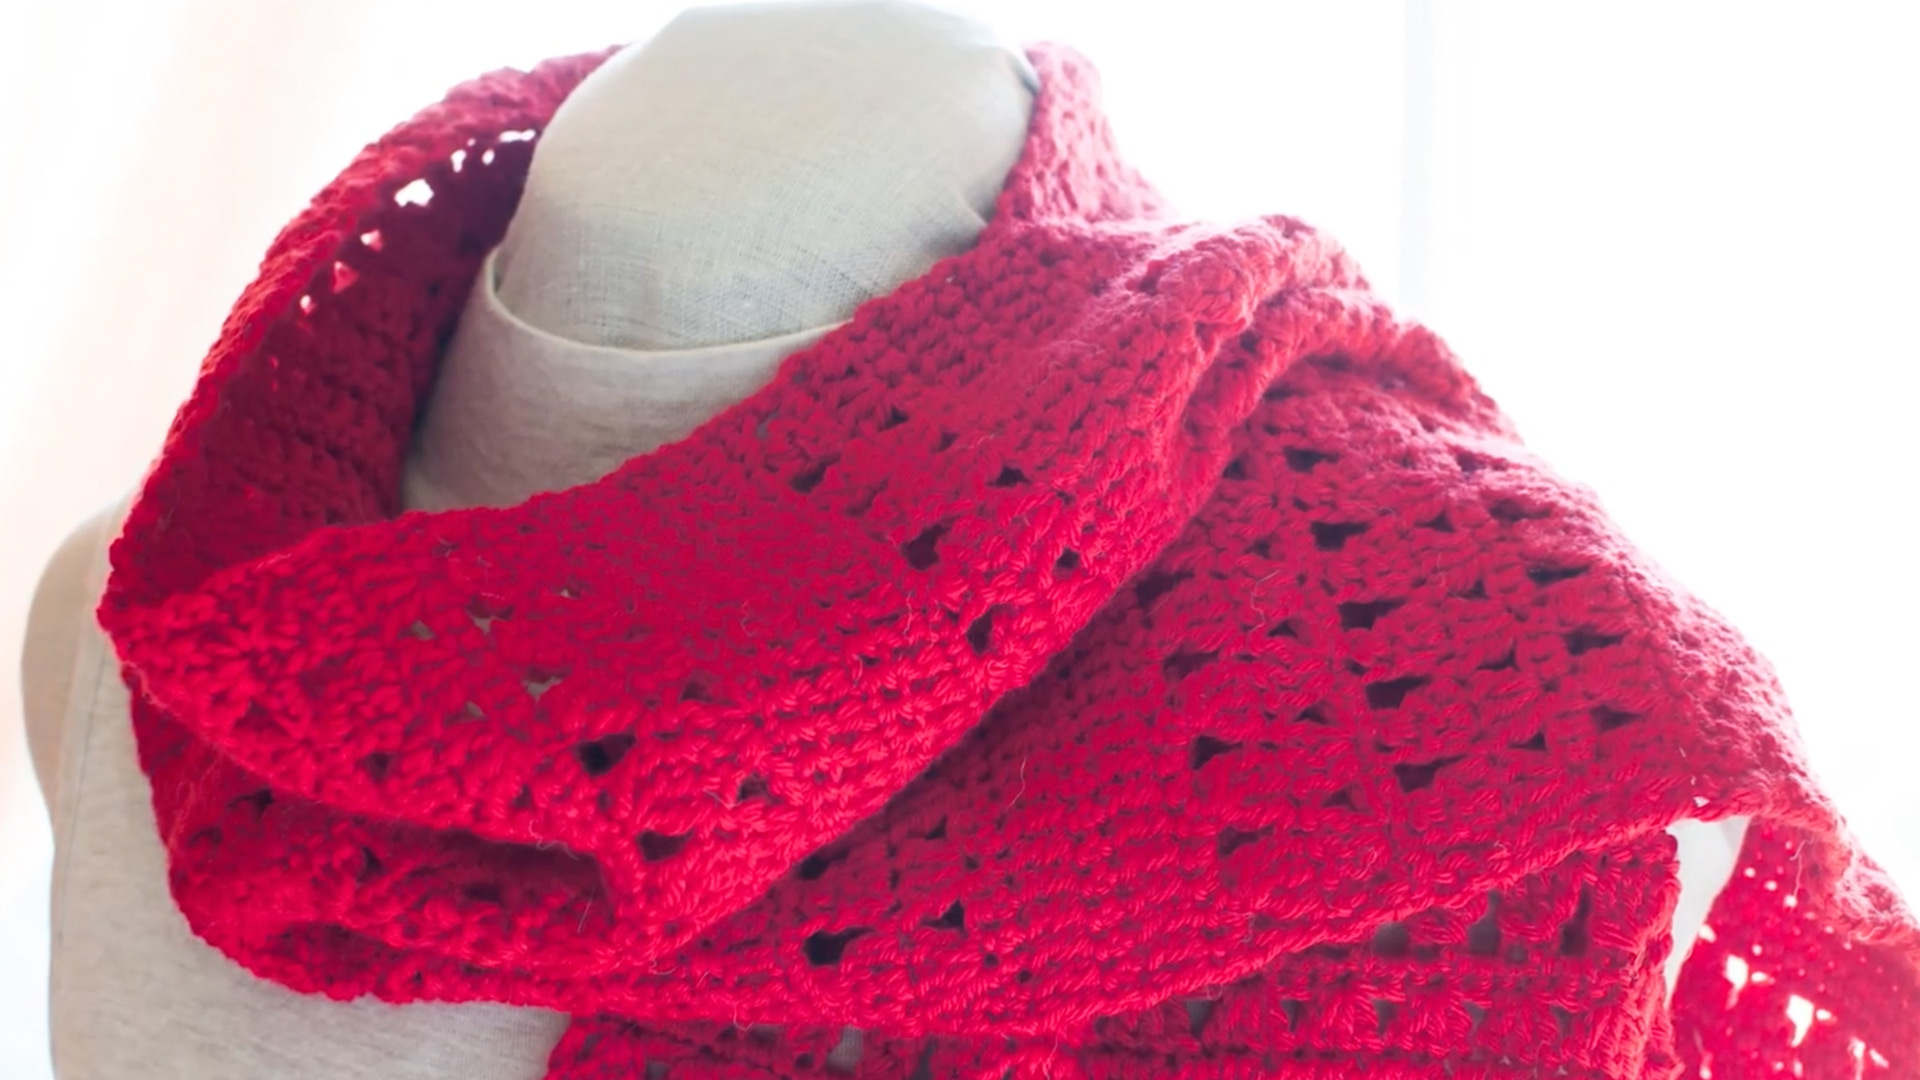 Modern Sampler Scarf | Shannon Leigh Roudhánarticle featured image thumbnail.